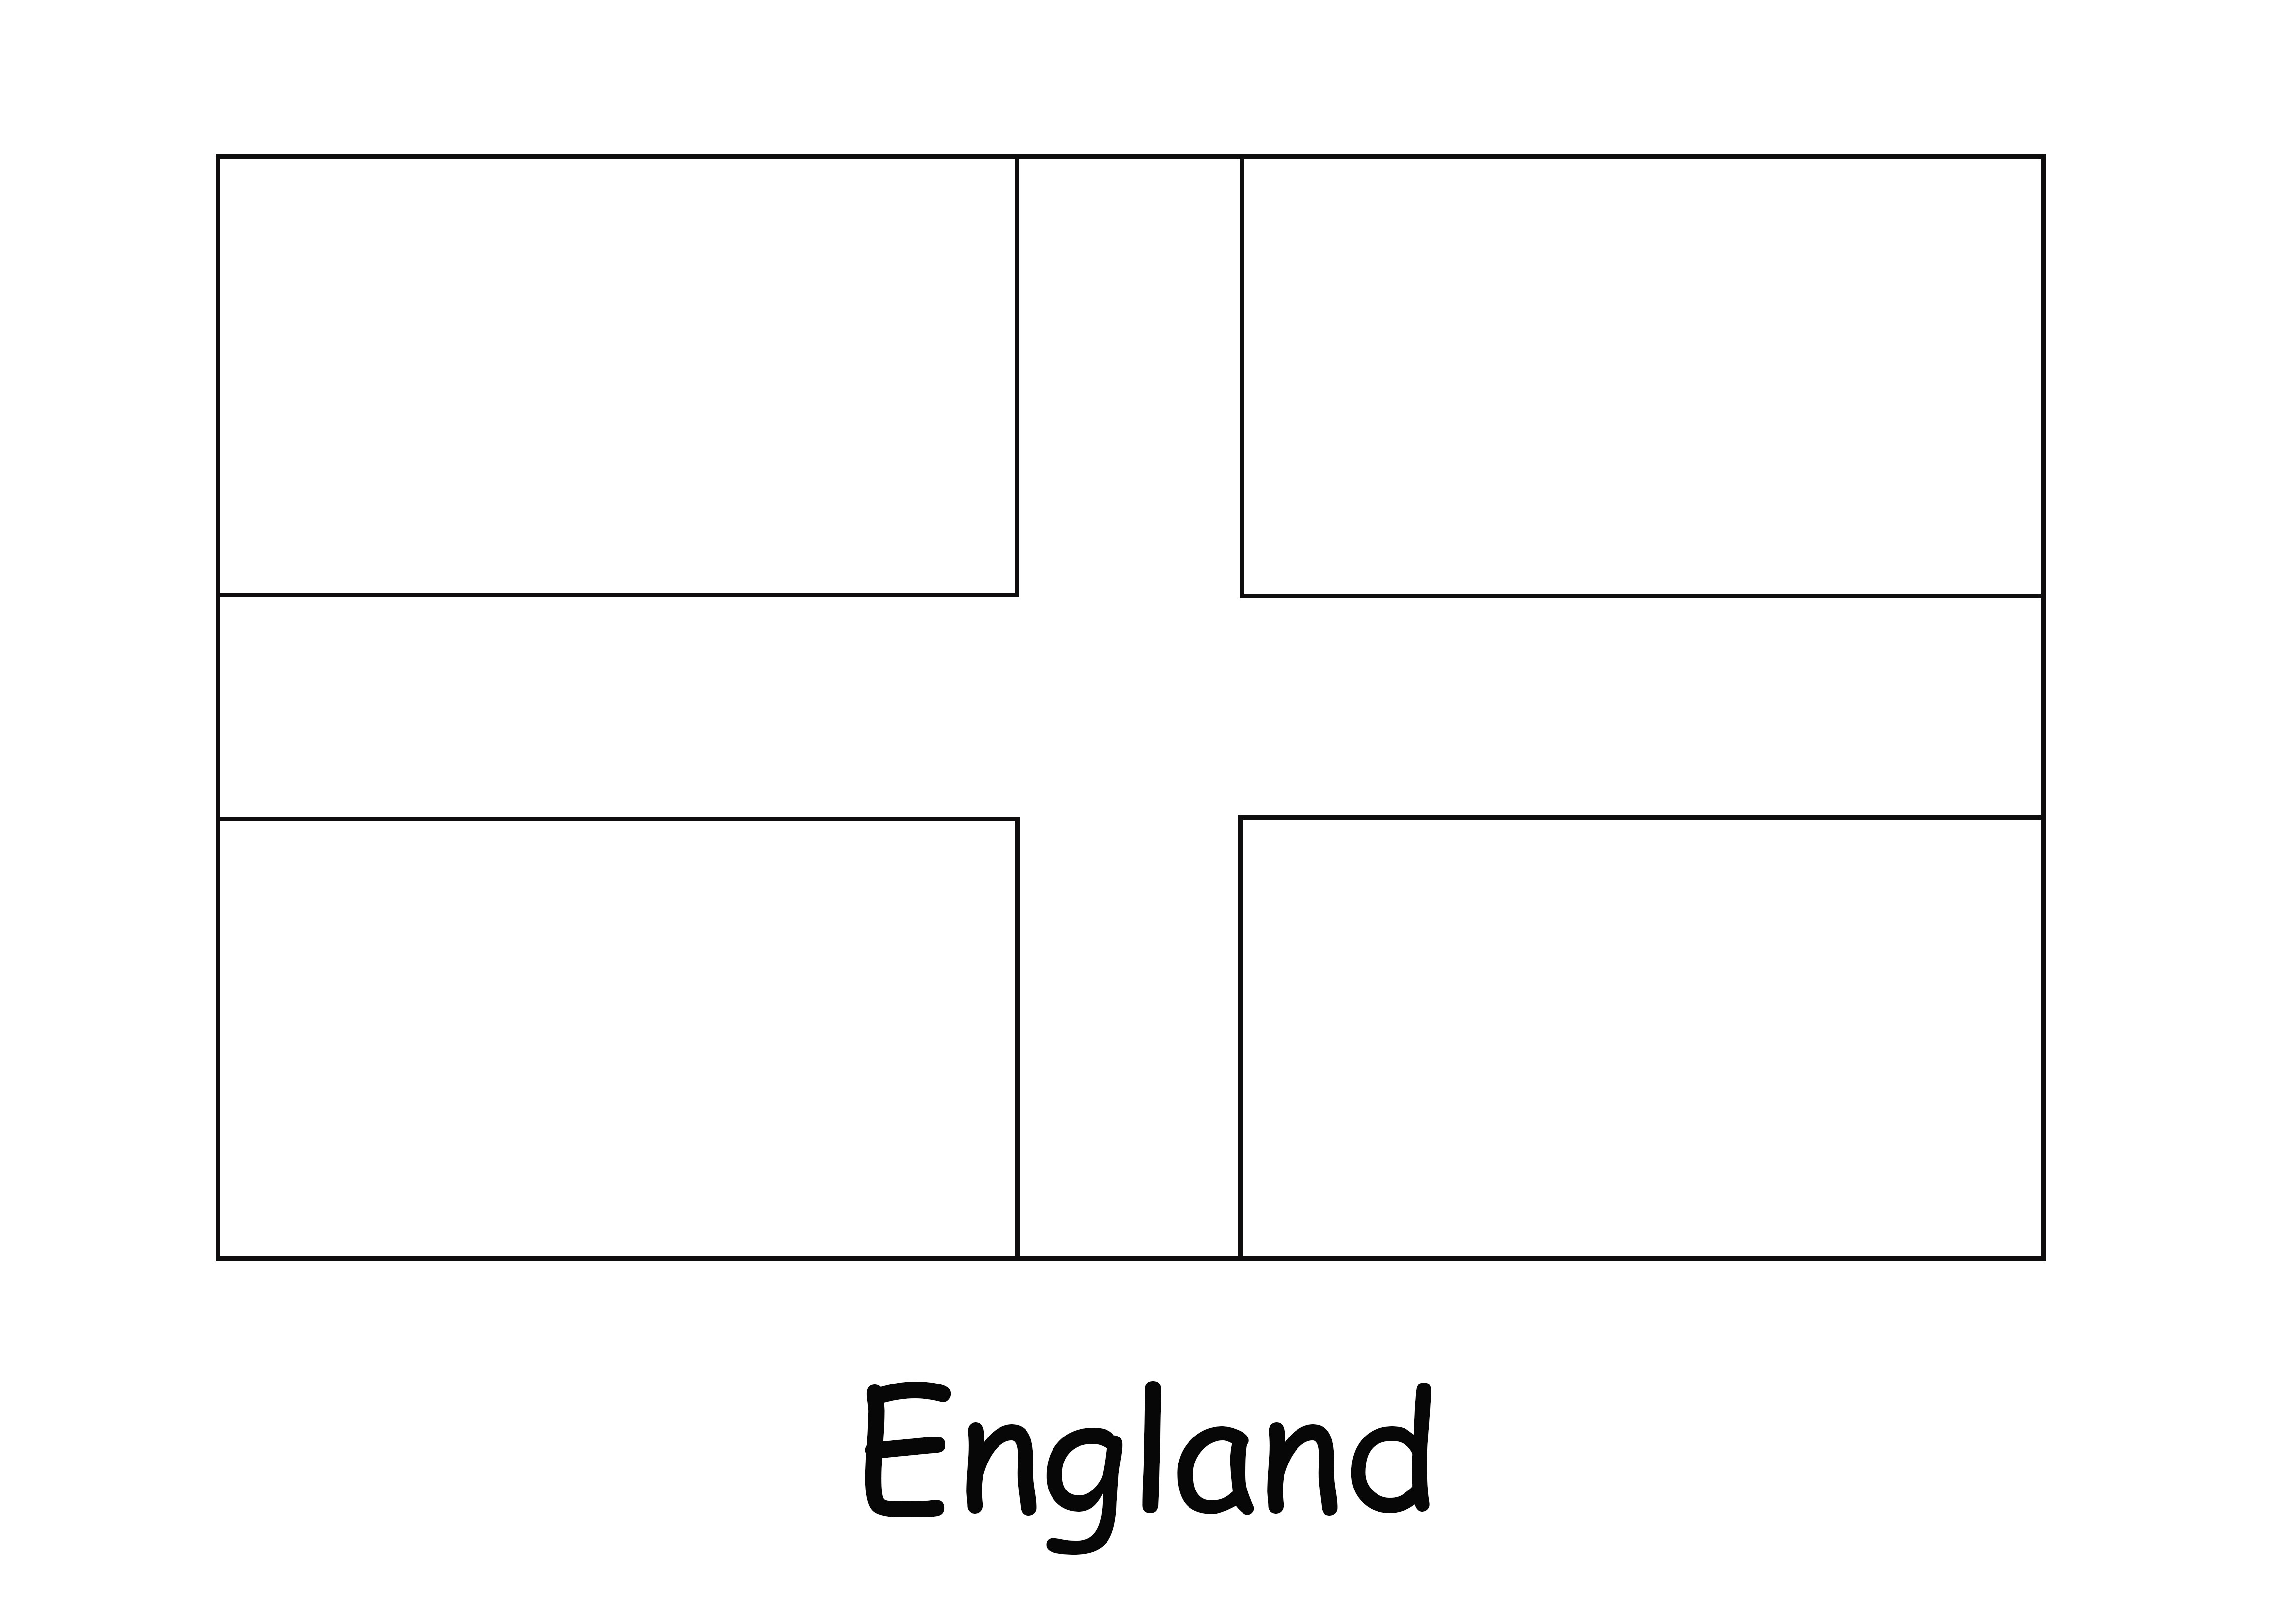 Super simple to color and easy to print England Flag image for kids